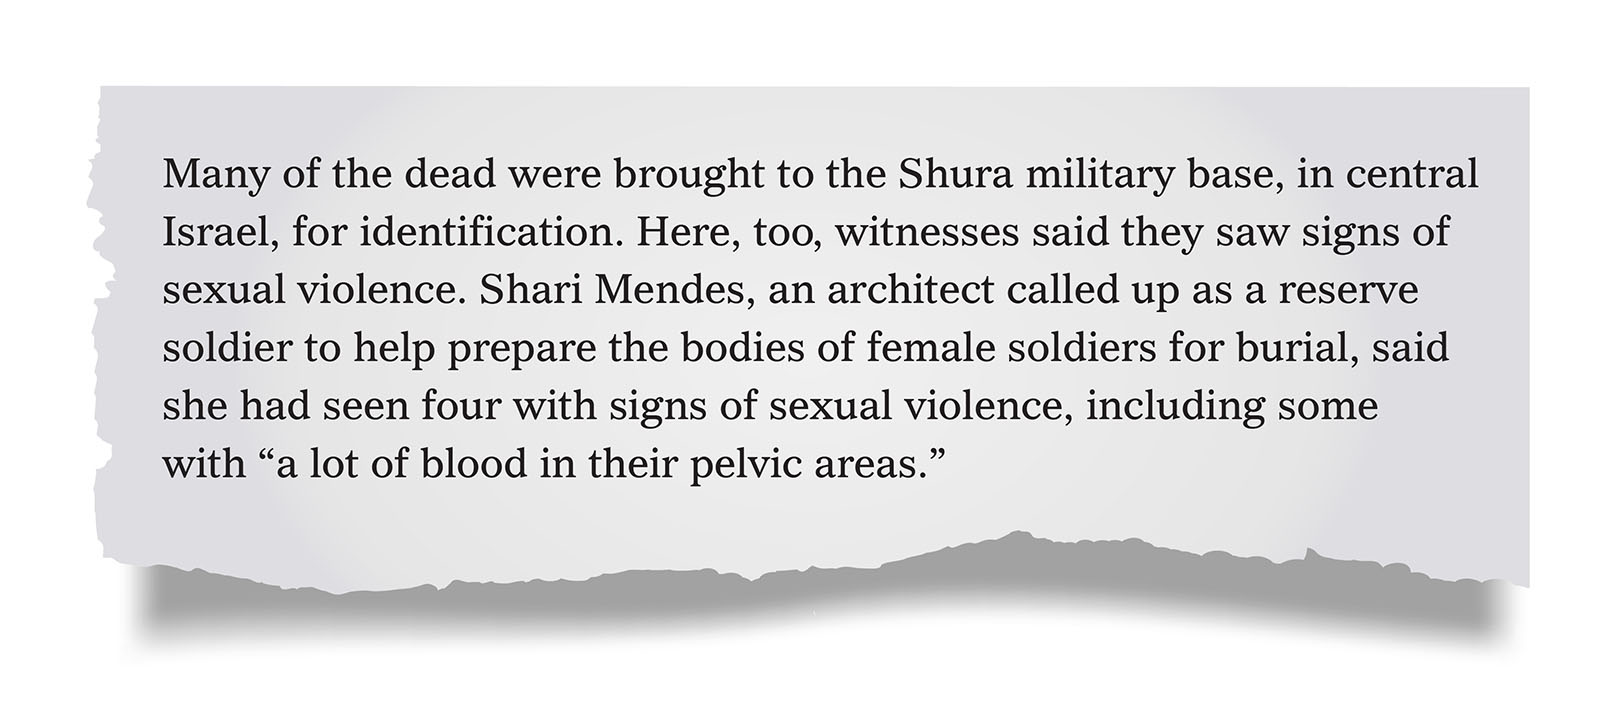 Pull quote:
Many of the dead were brought to the Shura military base, in central Israel, for identification. Here, too, witnesses said they saw signs of sexual violence. Shari Mendes, an architect called up as a reserve soldier to help prepare the bodies of female soldiers for burial, said she had seen four with signs of sexual violence, including some with “a lot of blood in their pelvic areas.”